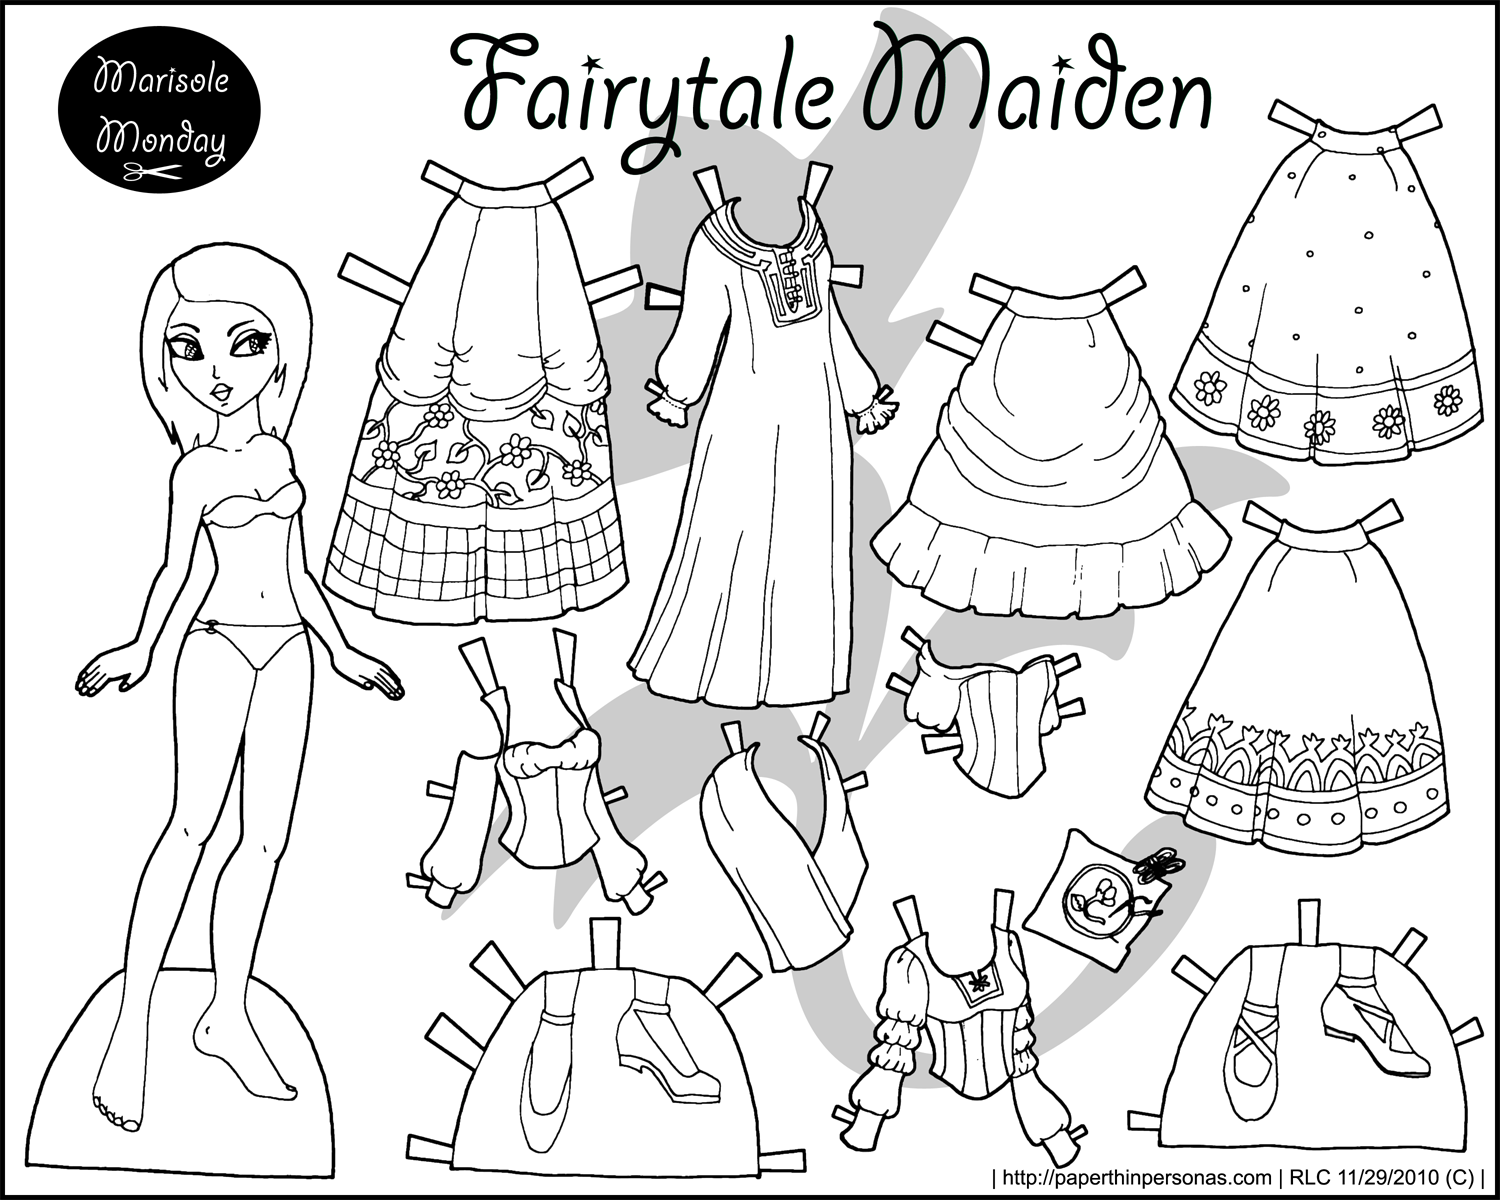 Four Paper Dolls in Black and White for Coloring